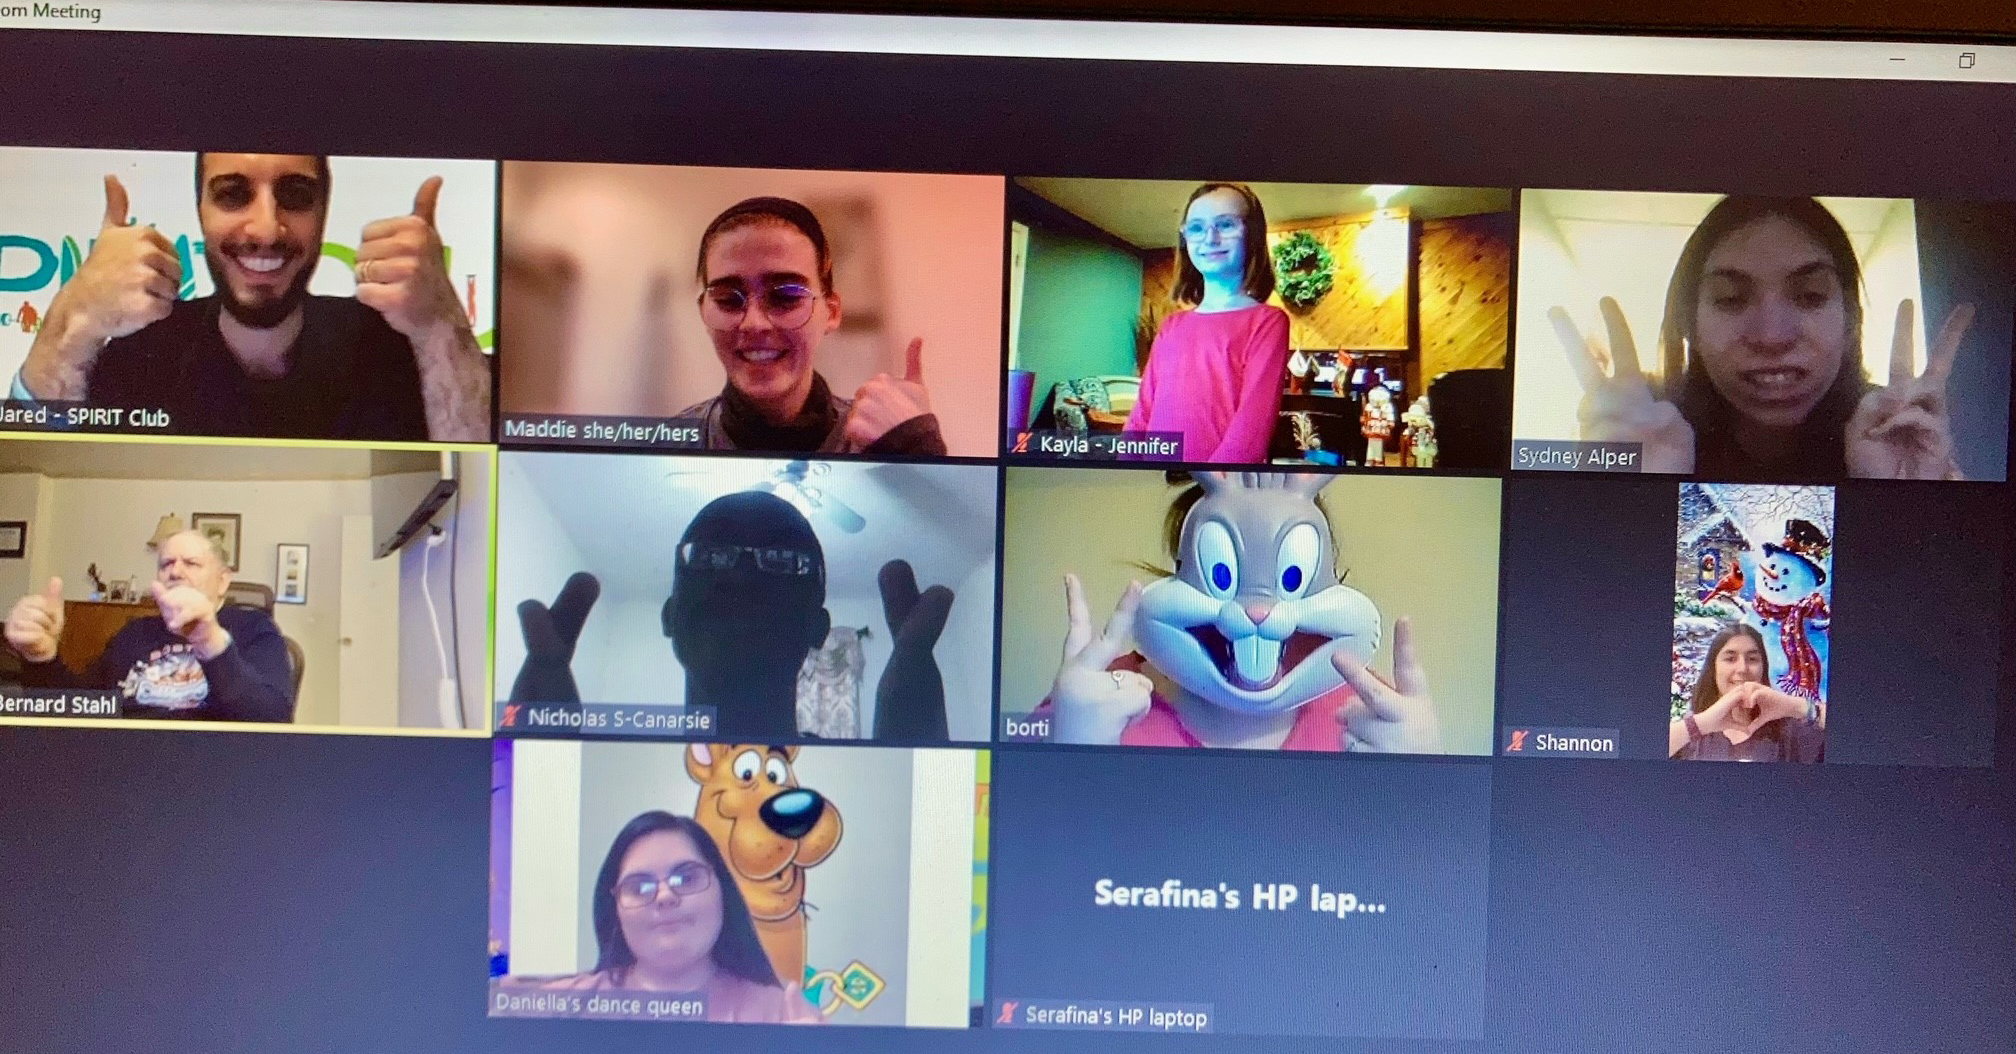 Best Buddies in New York participants on a zoom call during Spirit Club virtual event